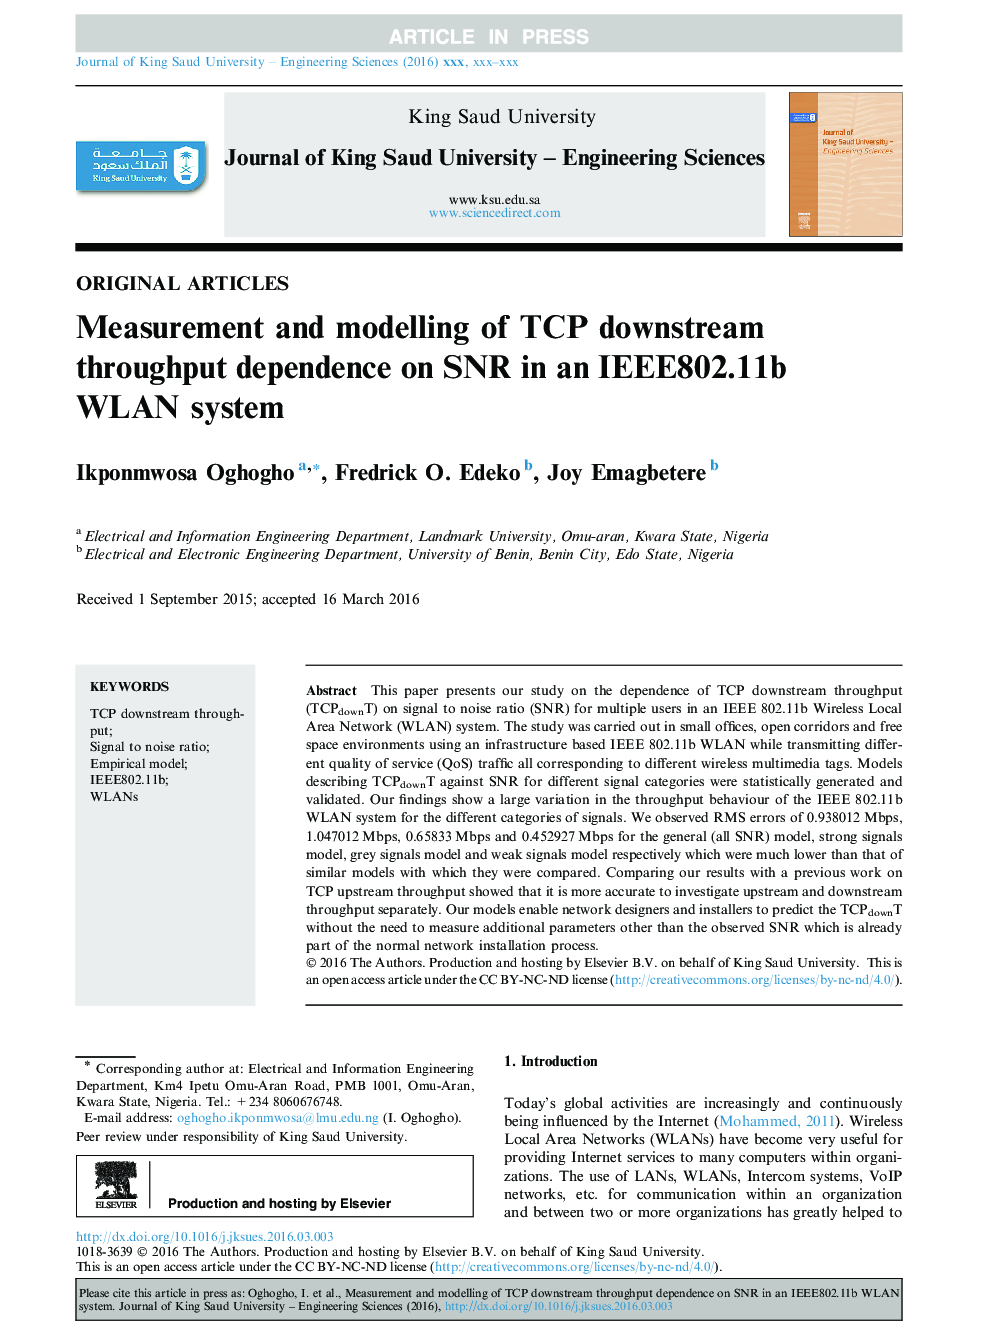 Measurement and modelling of TCP downstream throughput dependence on SNR in an IEEE802.11b WLAN system